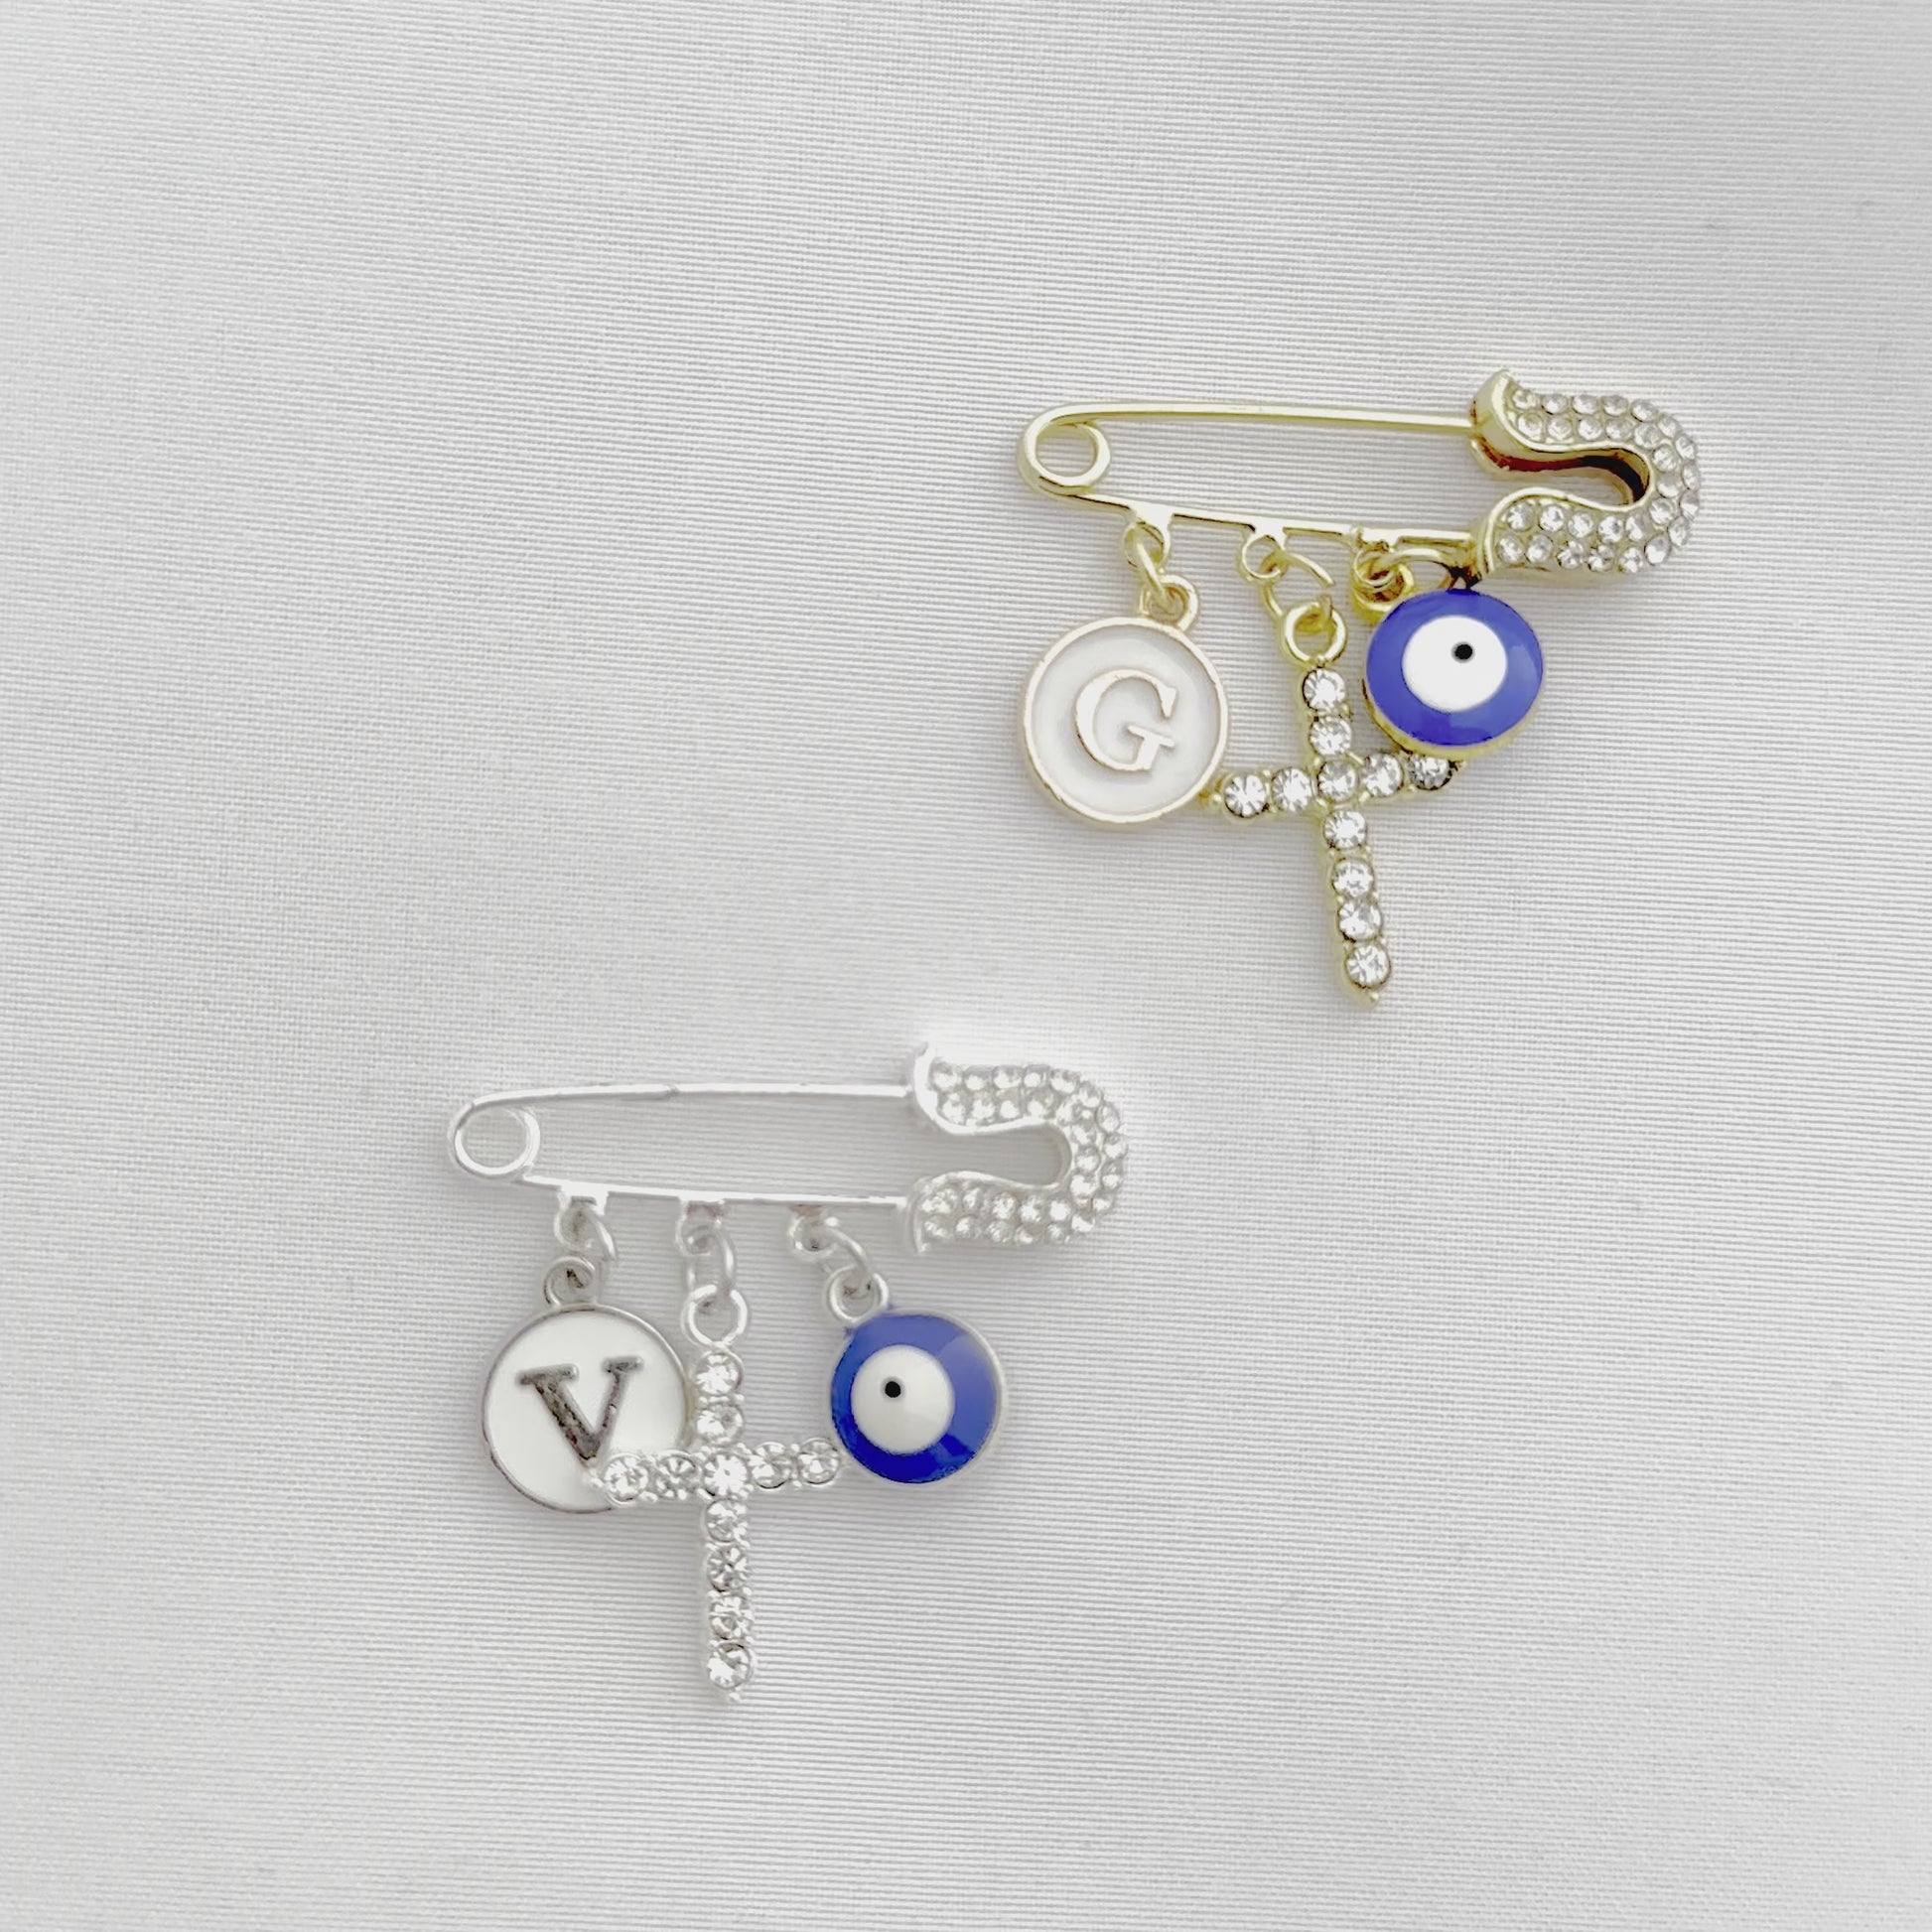 The Diamanté Evil Eye Baby Pin is meaningful gift for any new parent or baby shower, and a timeless keepsake that can be passed down from generation to generation.